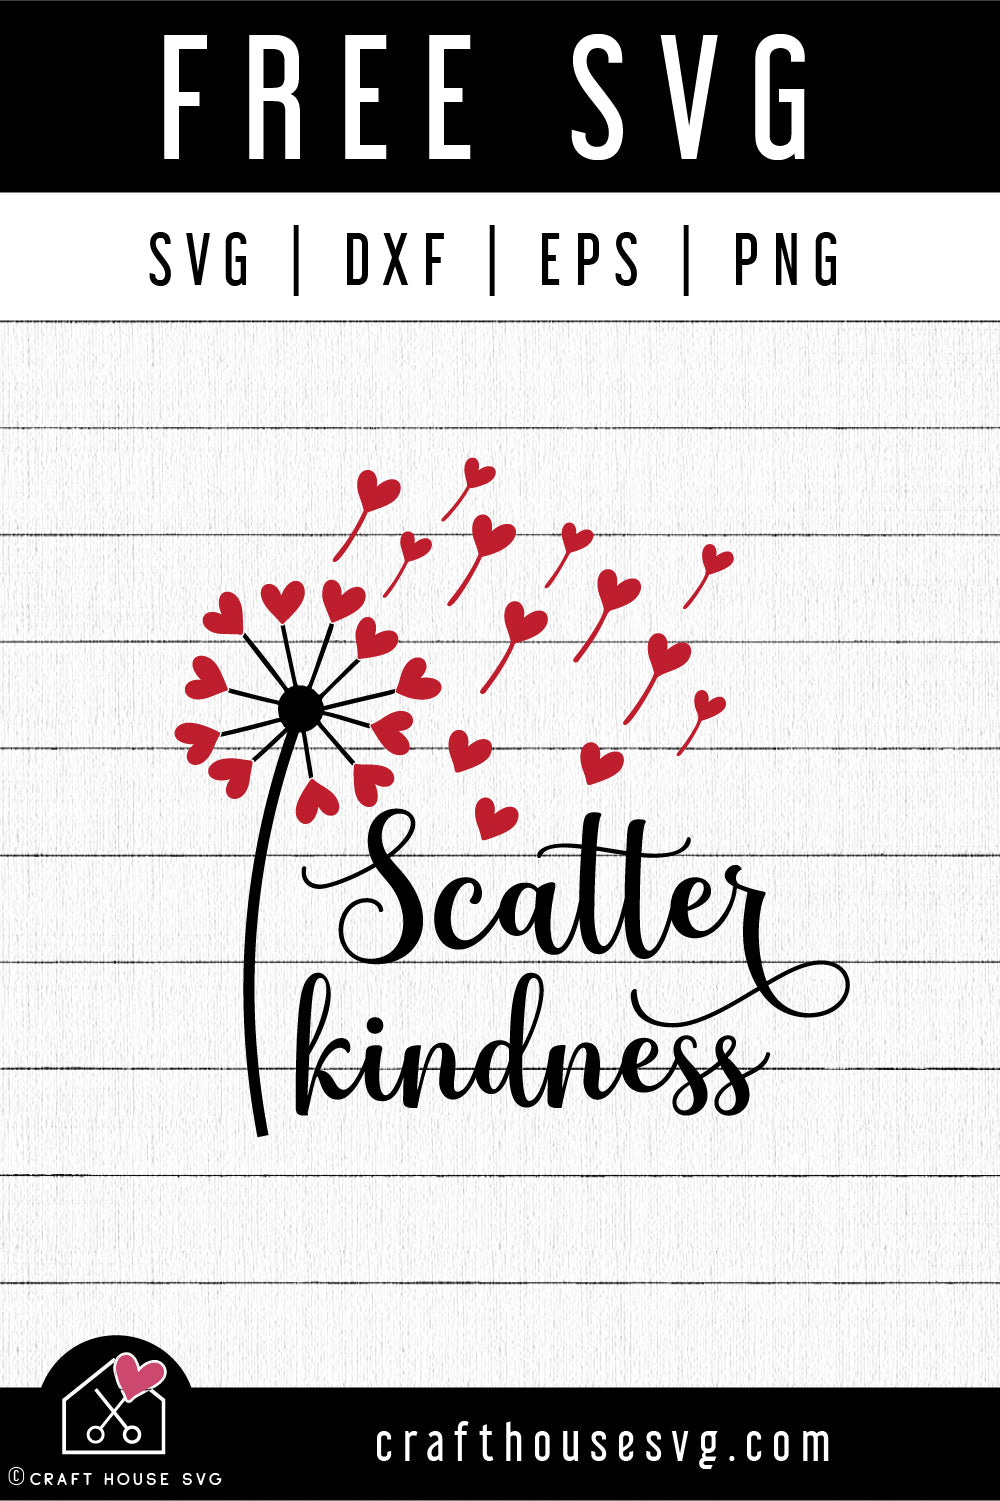 Giving Thanks! - Scattering Kindness